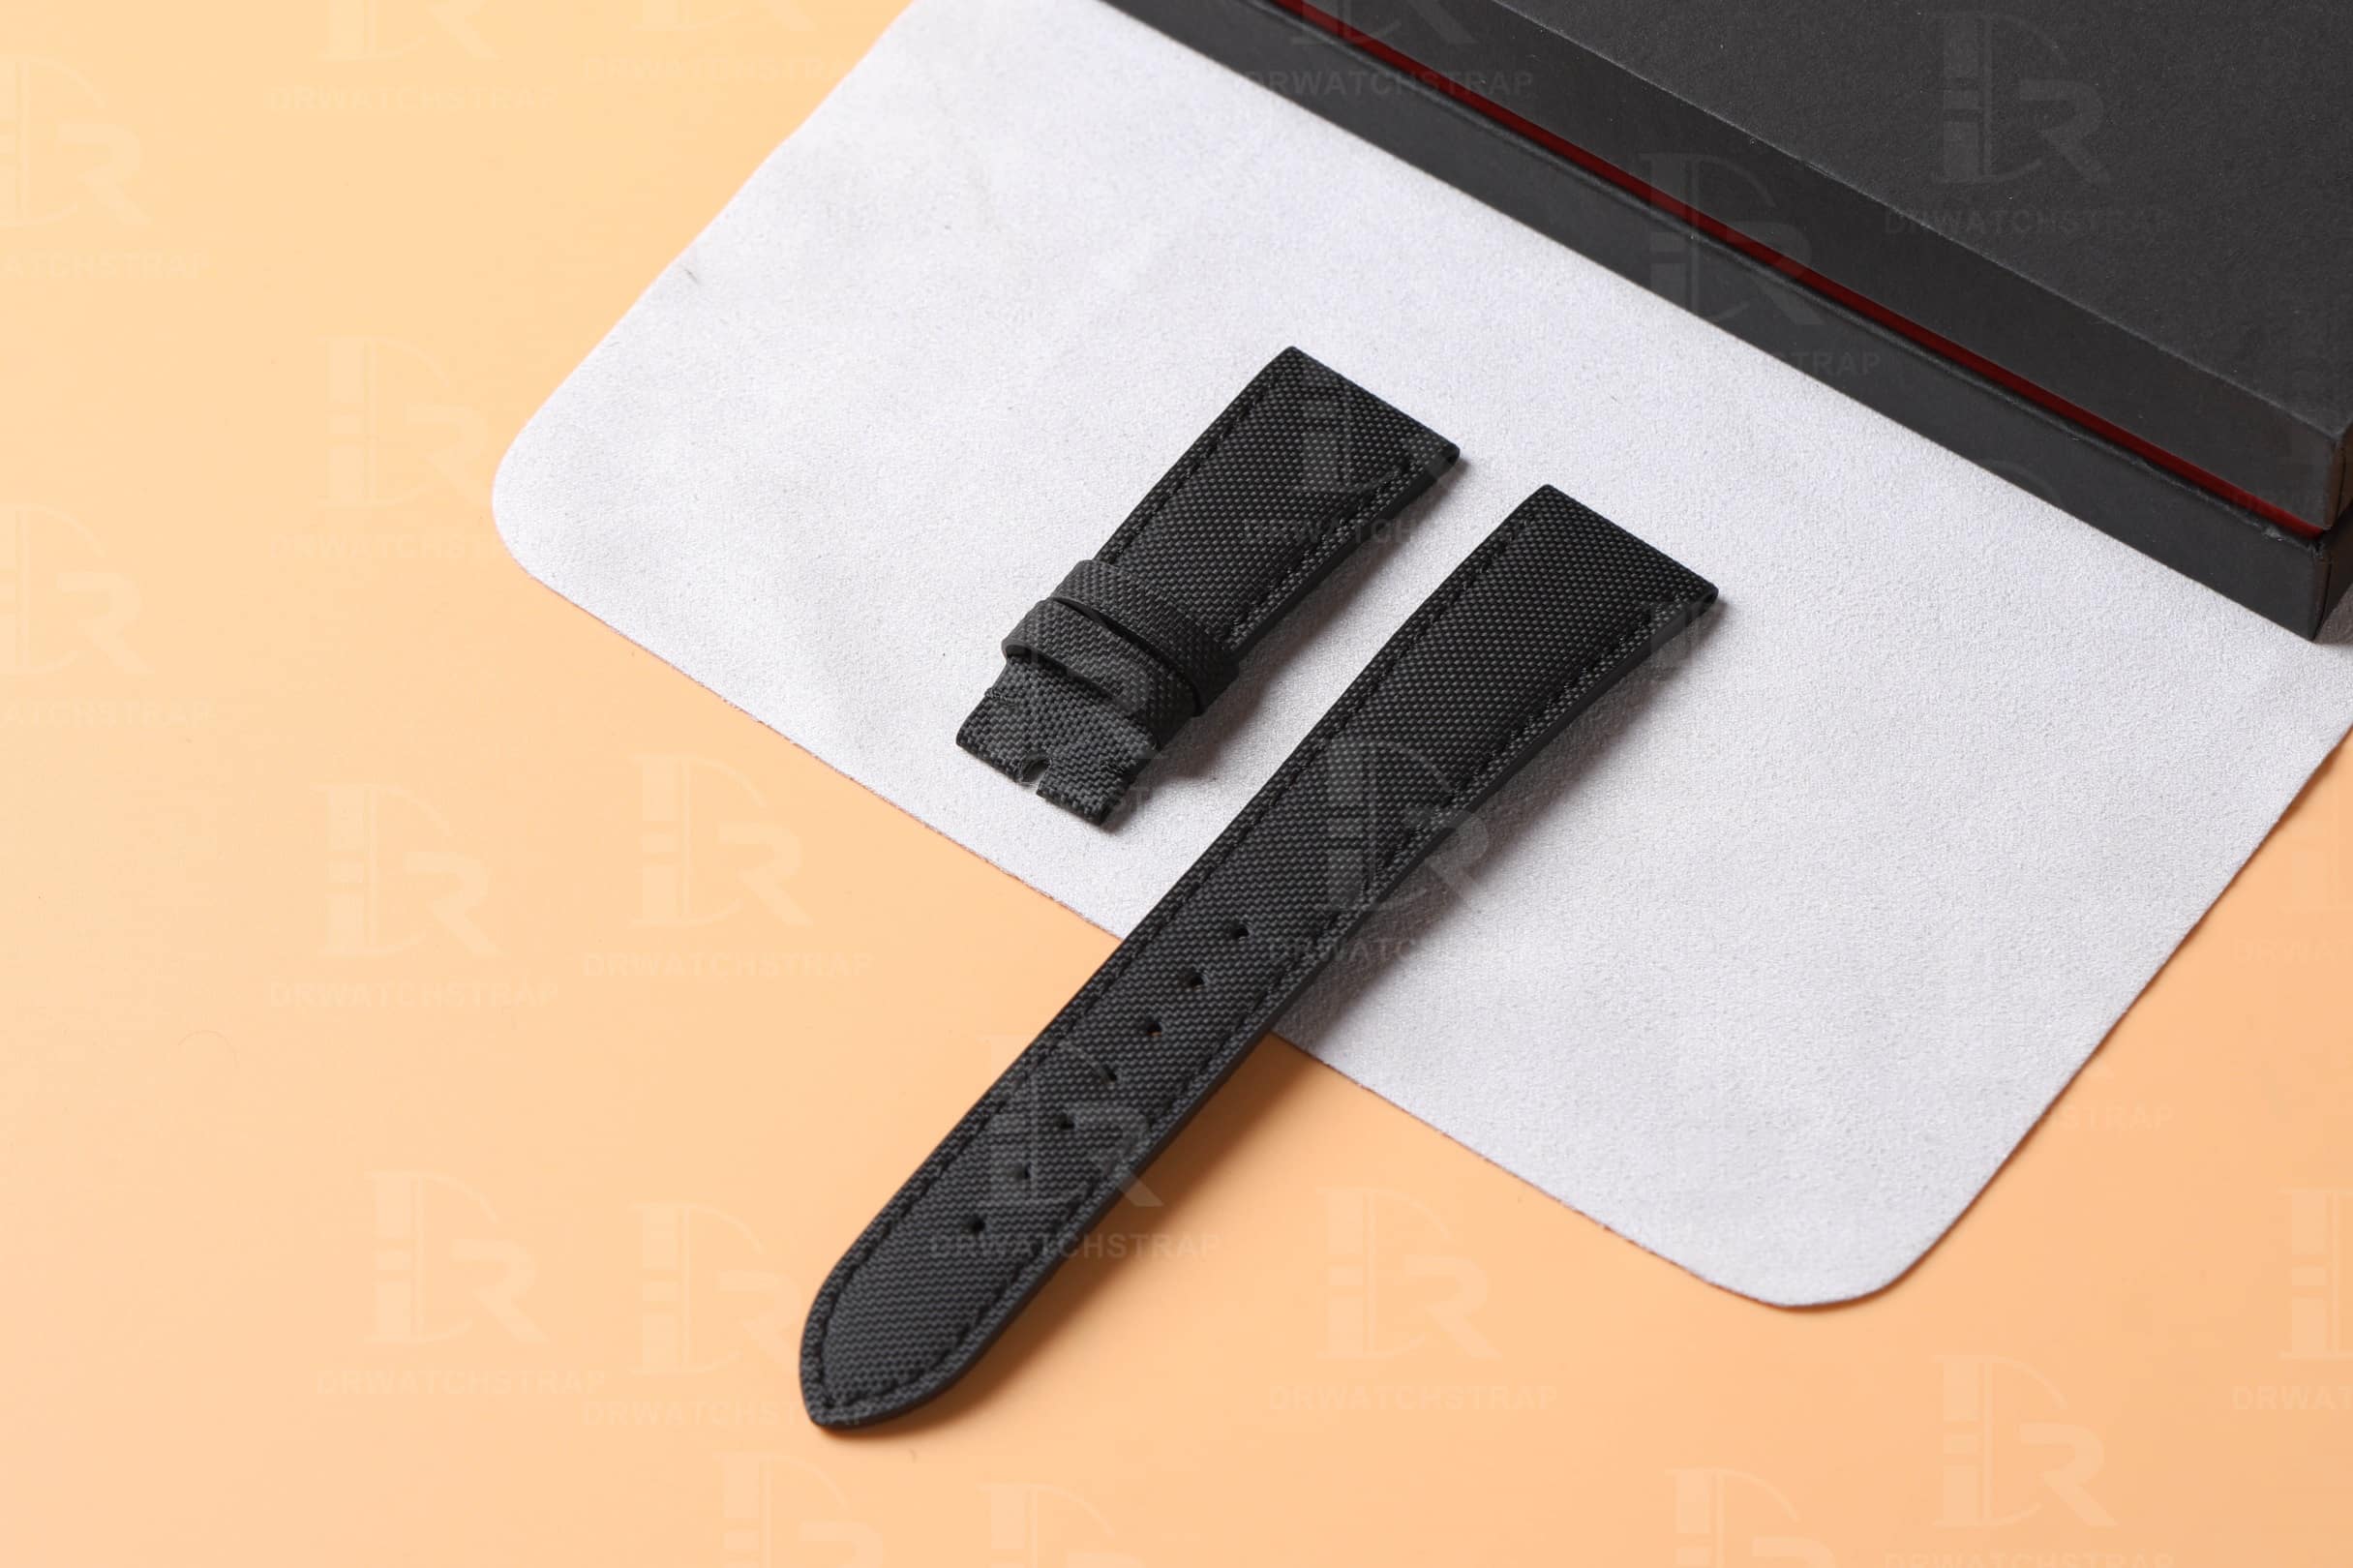 Custom aftermarket best quality nylon fabric canvas material replacement Tudor watch strap and watch band for Tudor Heritage Black Bay 58 41 watches - Shop the high-end nylon watchbands and strap online at a low price